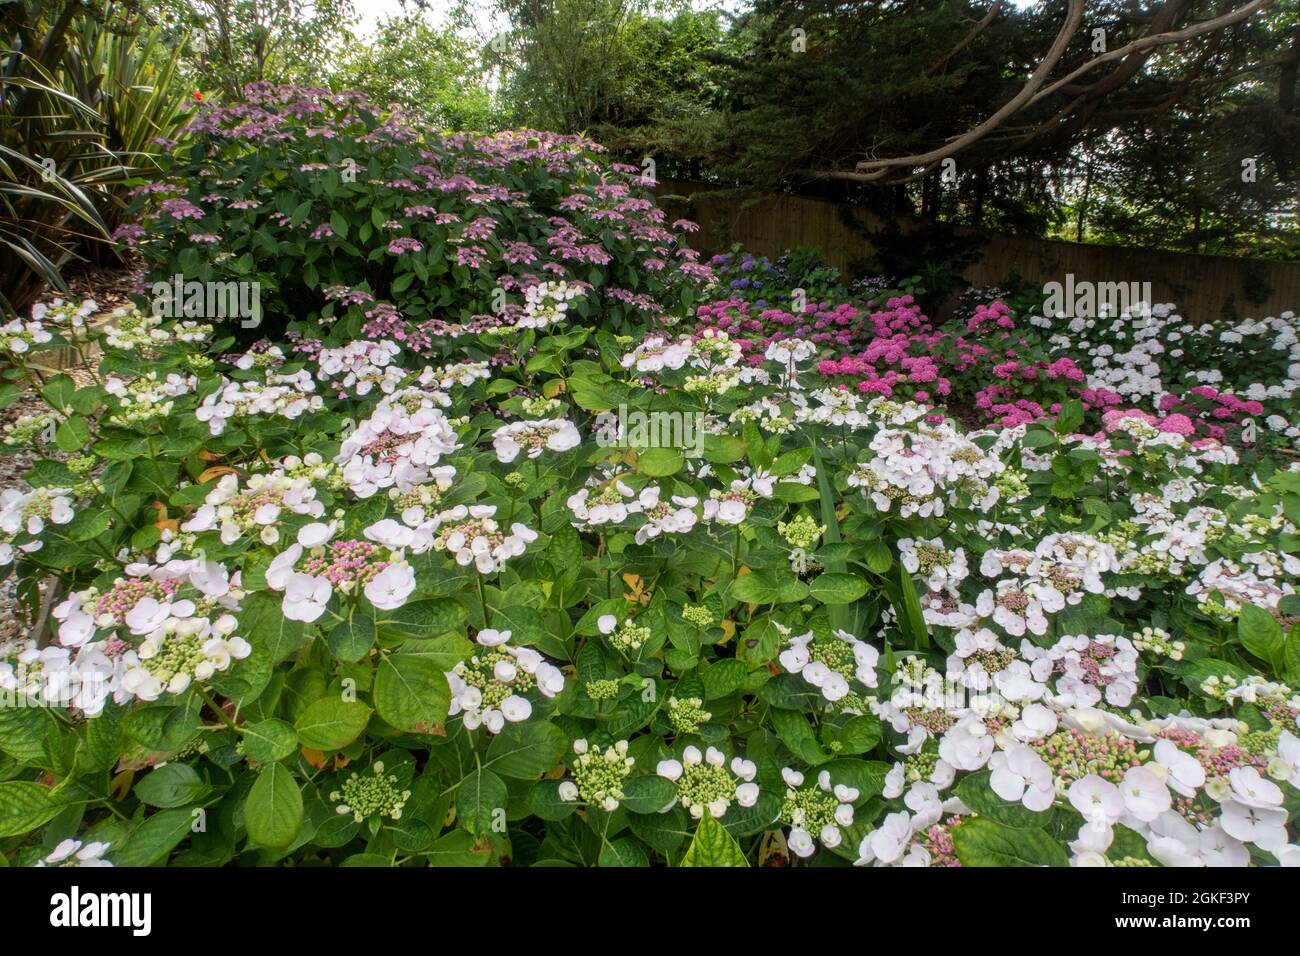 Lacecap hydrangea Teller White with hydrangea Blue Wave (Mariesii Perfecta) behind in a woodland setting Stock Photo